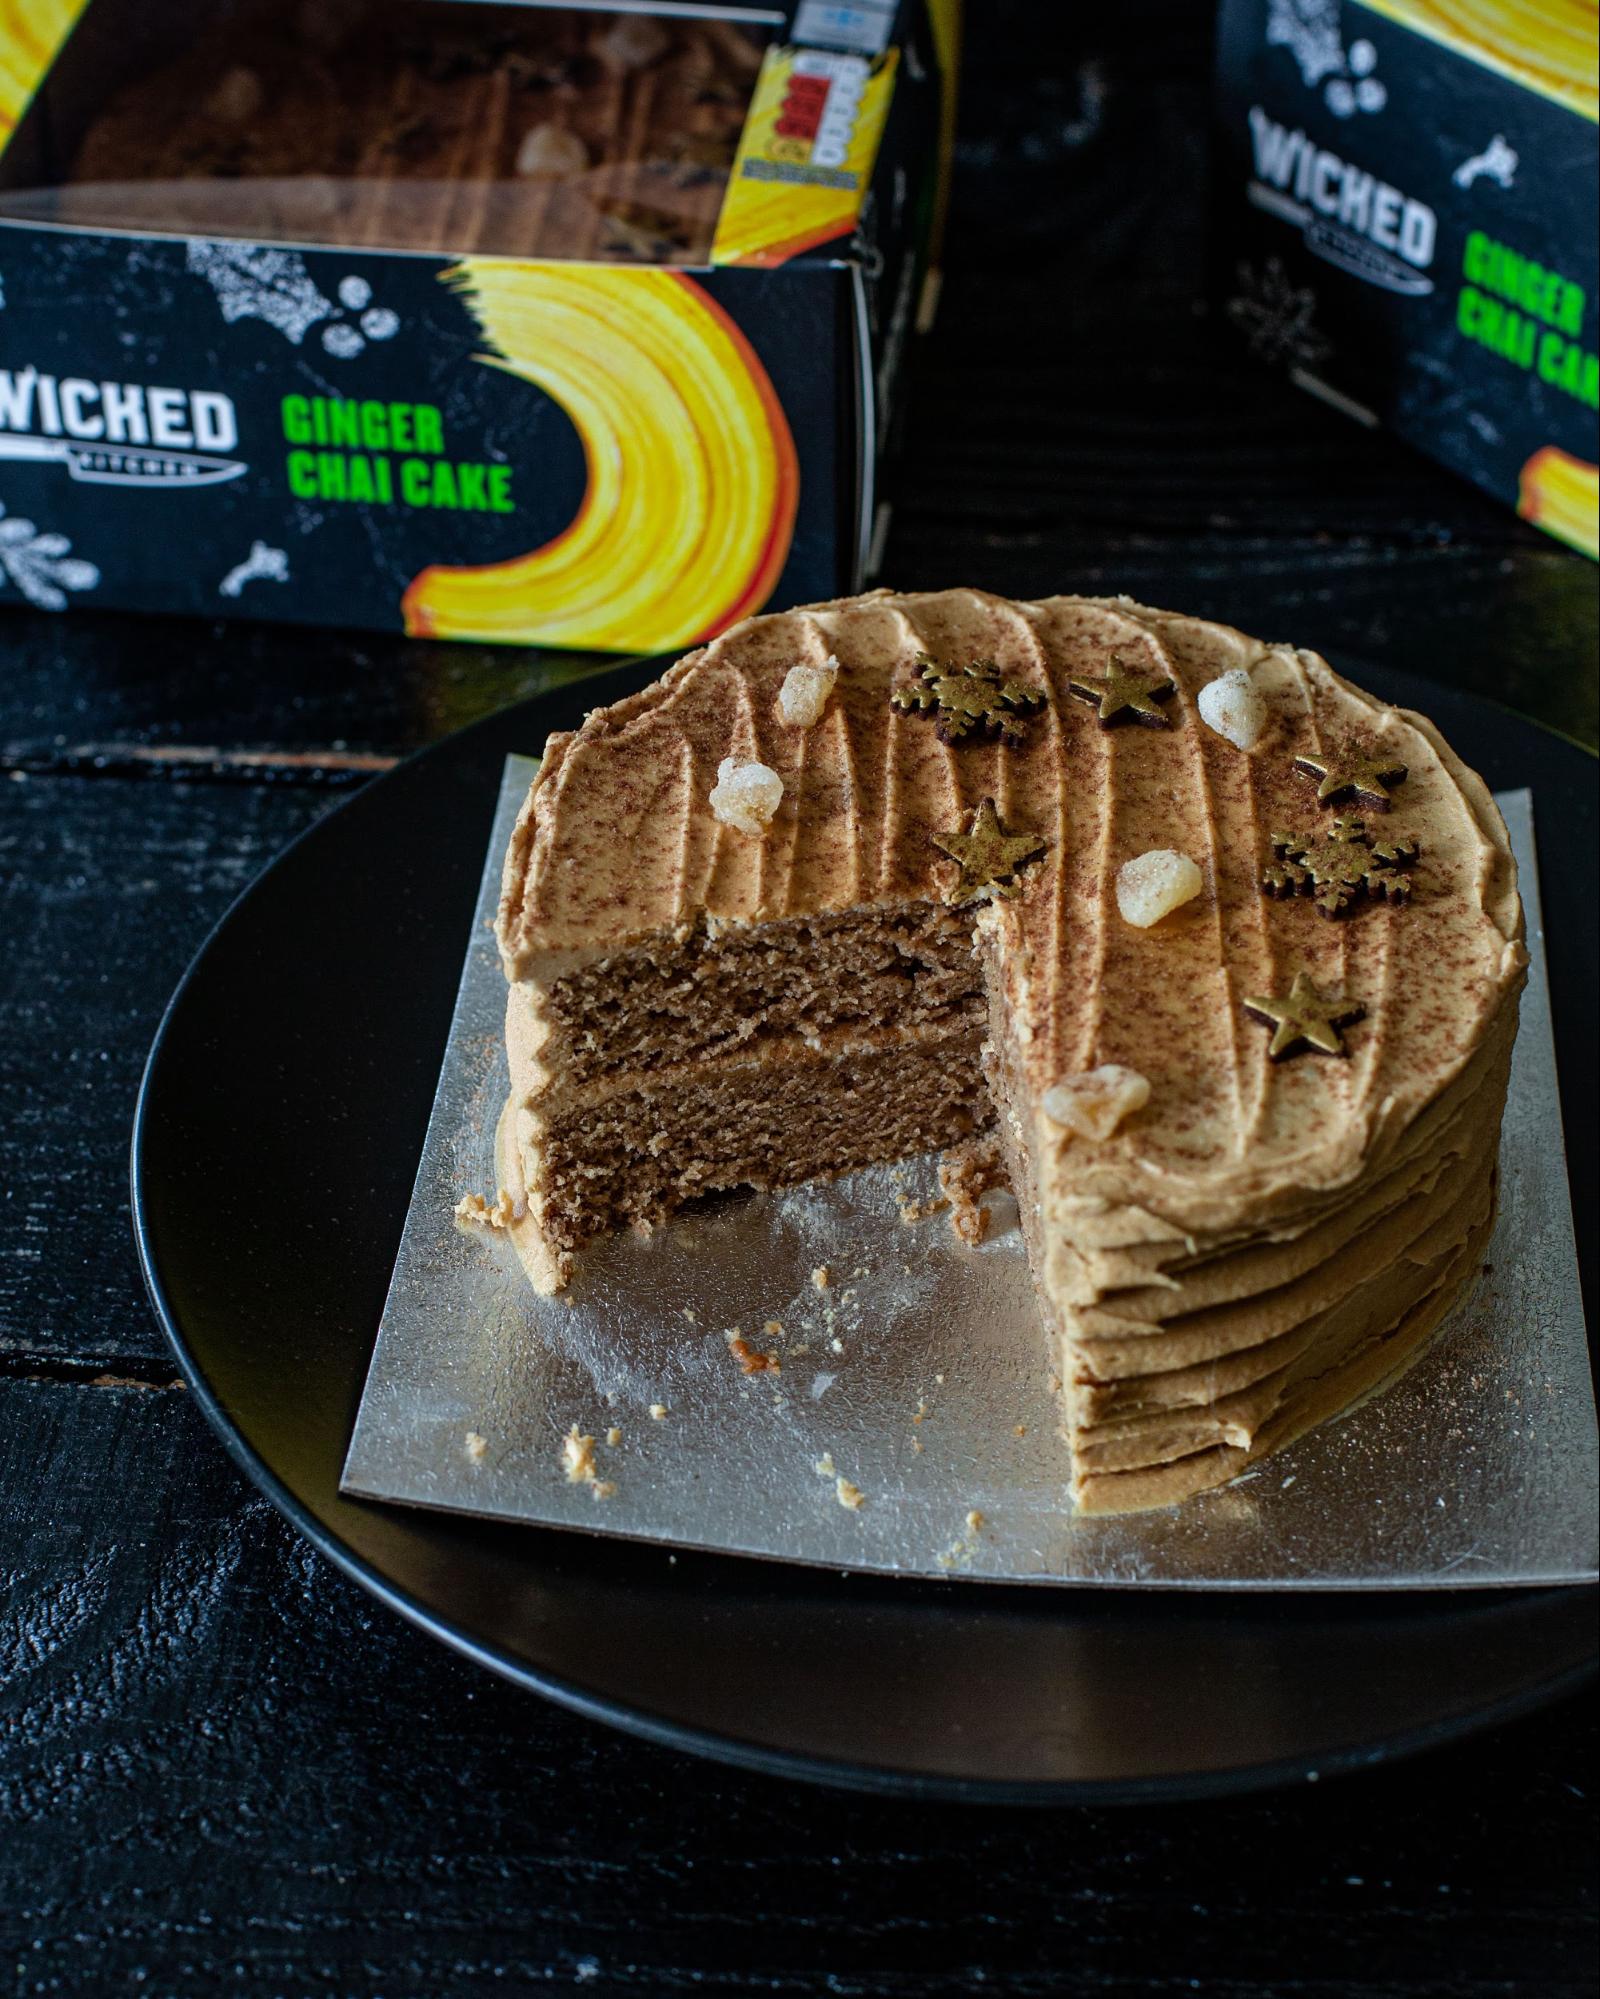 wicked kitchen ginger cake